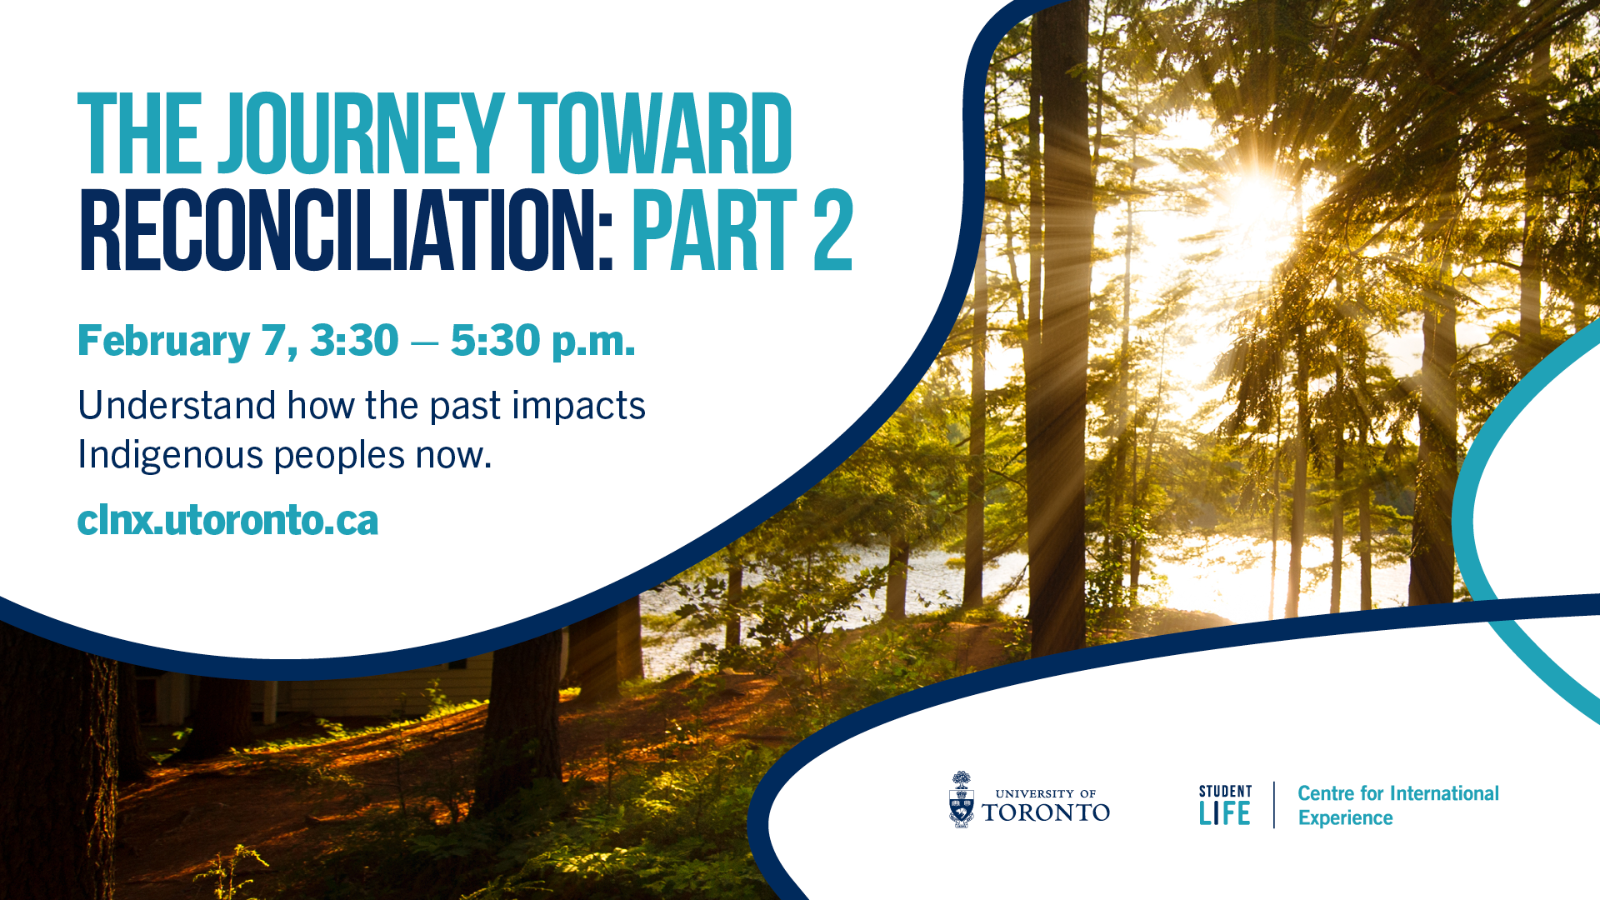 An image for forest and lake with sun shining through and text, "The Journey Toward Reconciliation: Part 2; February 7, 3:30 - 5:30PM; Understand how the past impacts Indigenous peoples now. clnx.utoronto.ca".